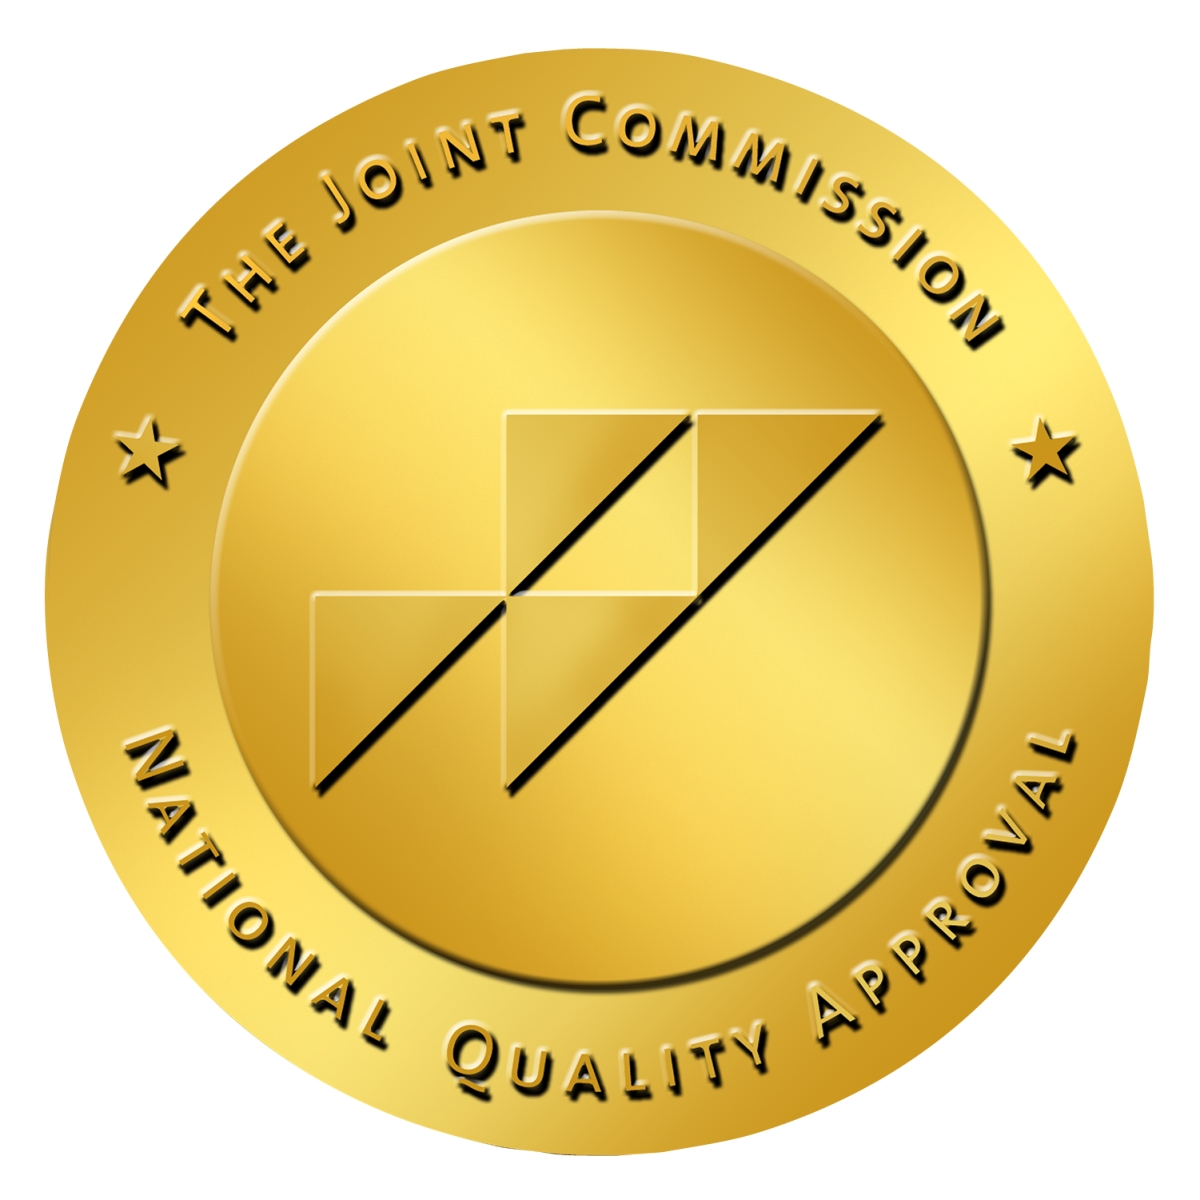 A golden seal logo for the Joint Commission.